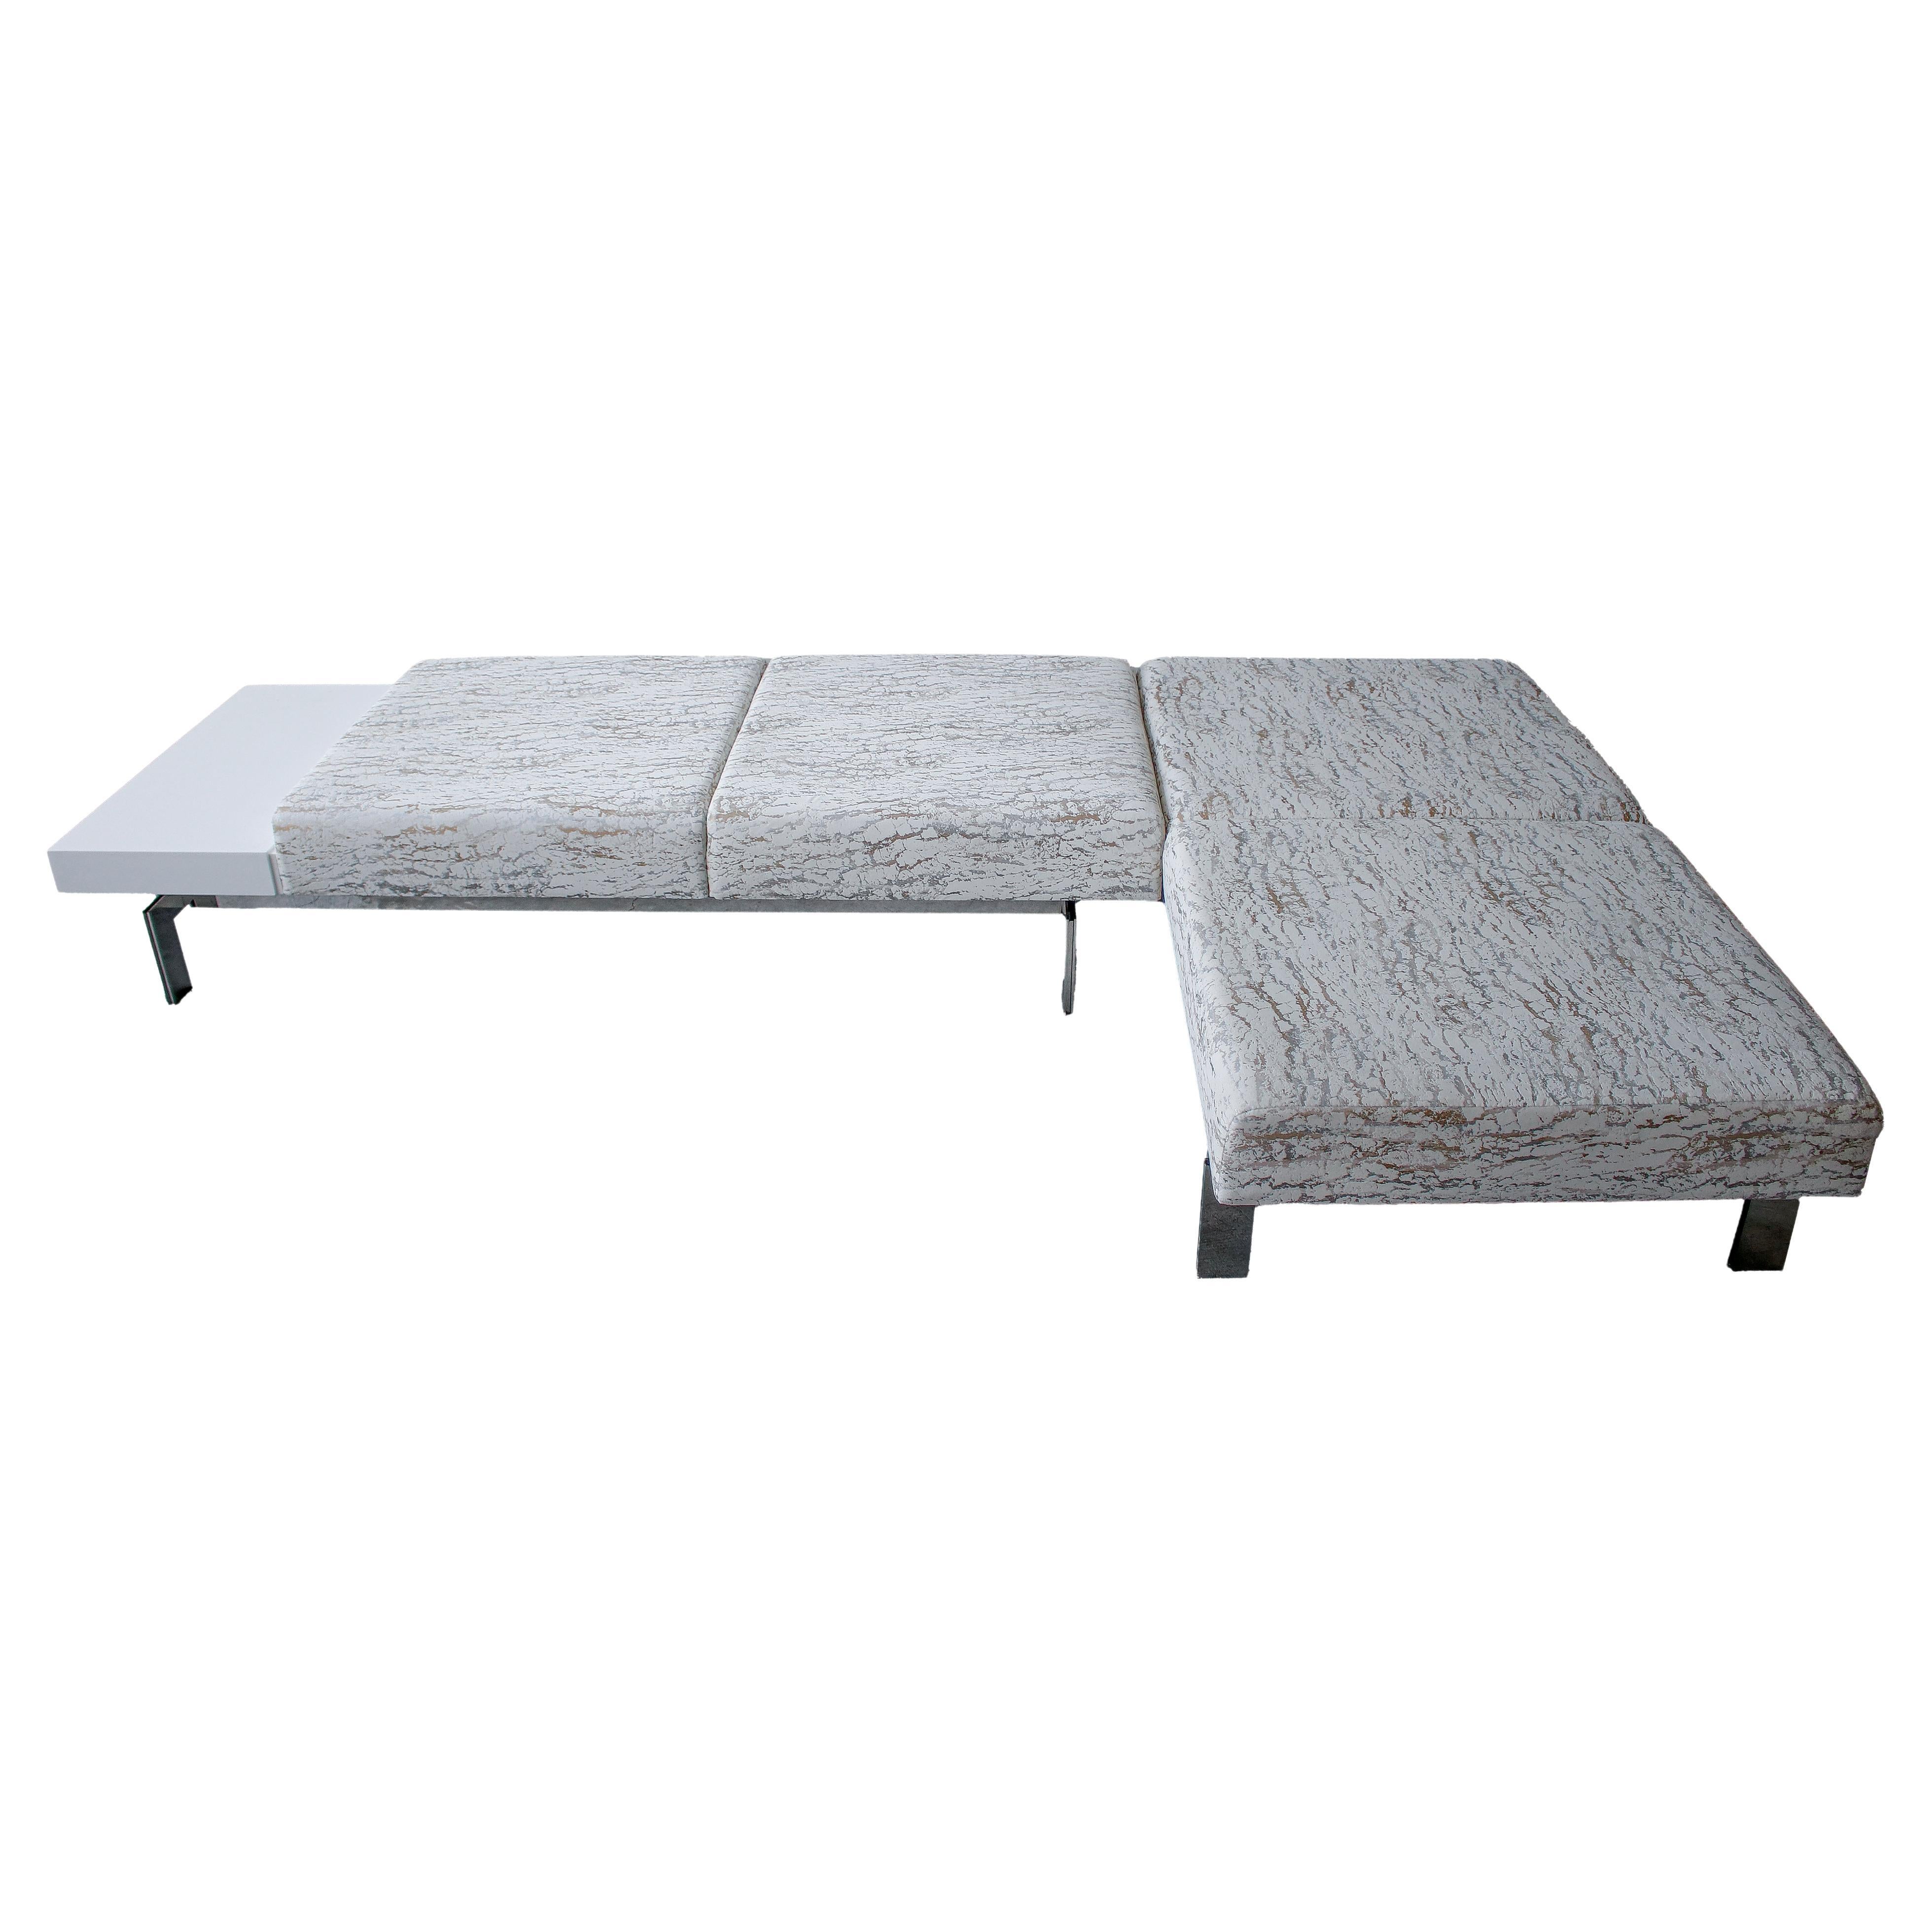 Pair of Modern Chrome Stainless Steel Benches